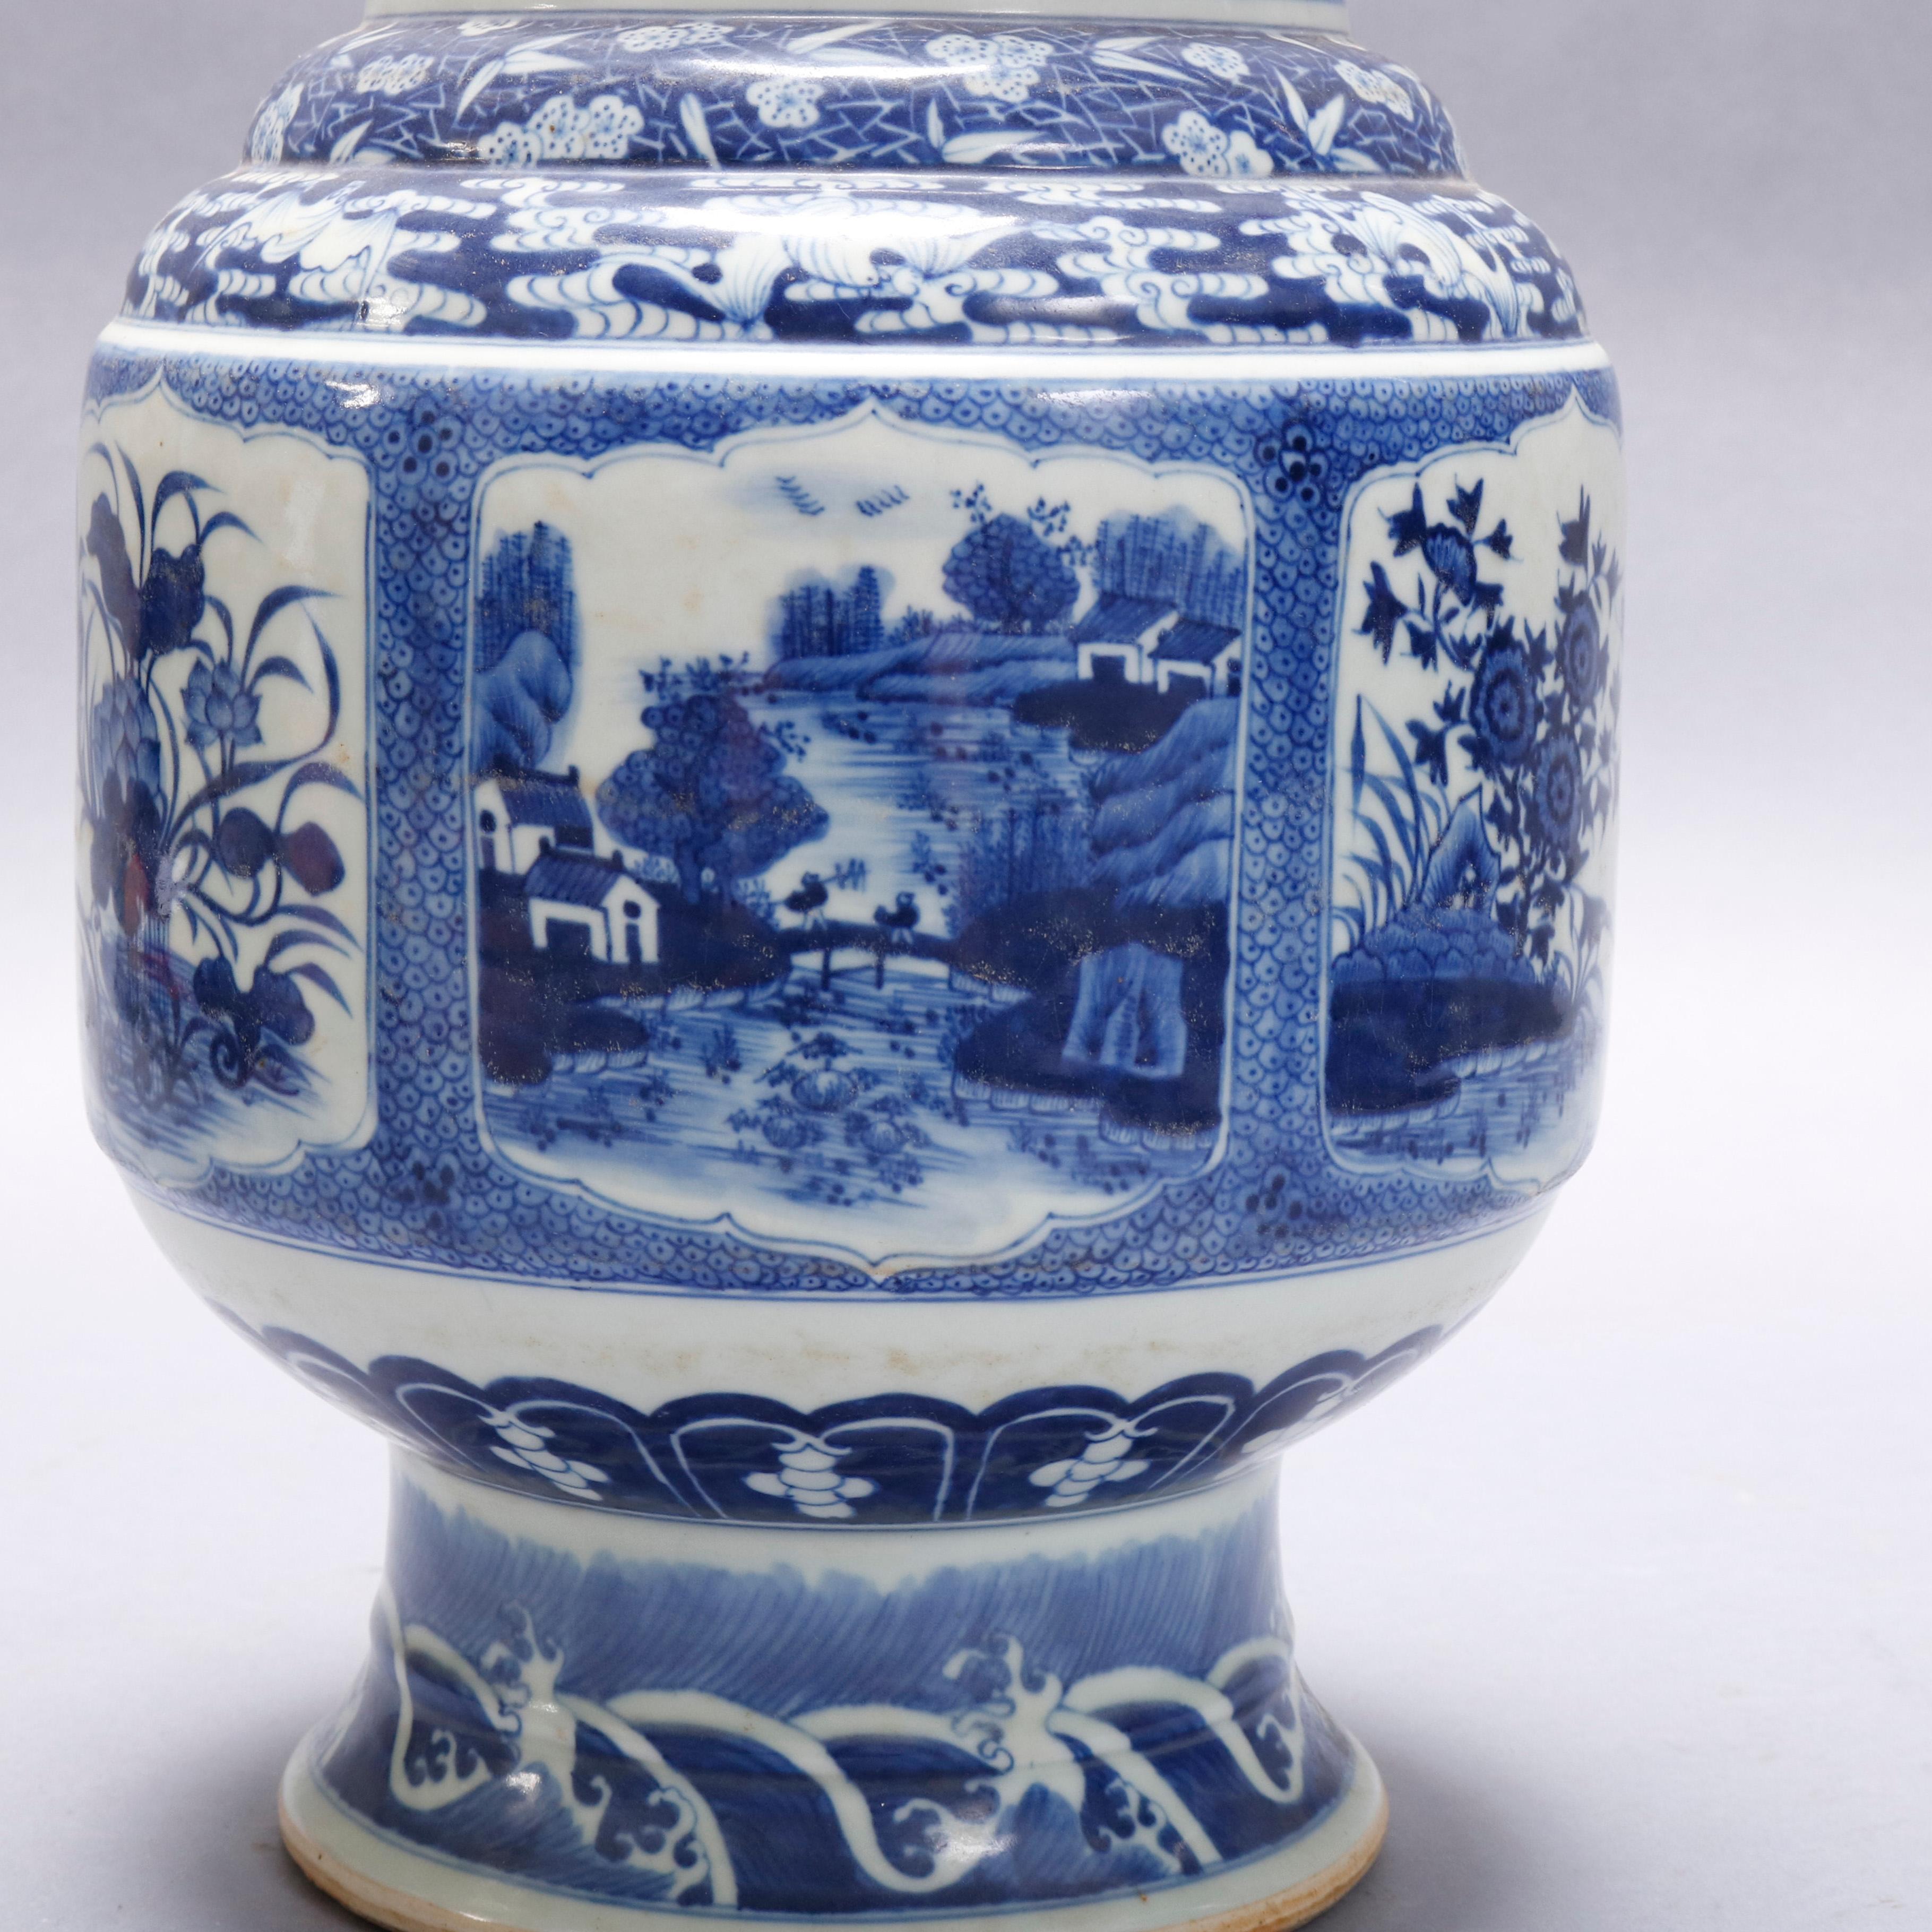 A vintage Chinese porcelain tall vase offers urn form with blue and white paneled landscape decoration, 20th century

Measures- 19